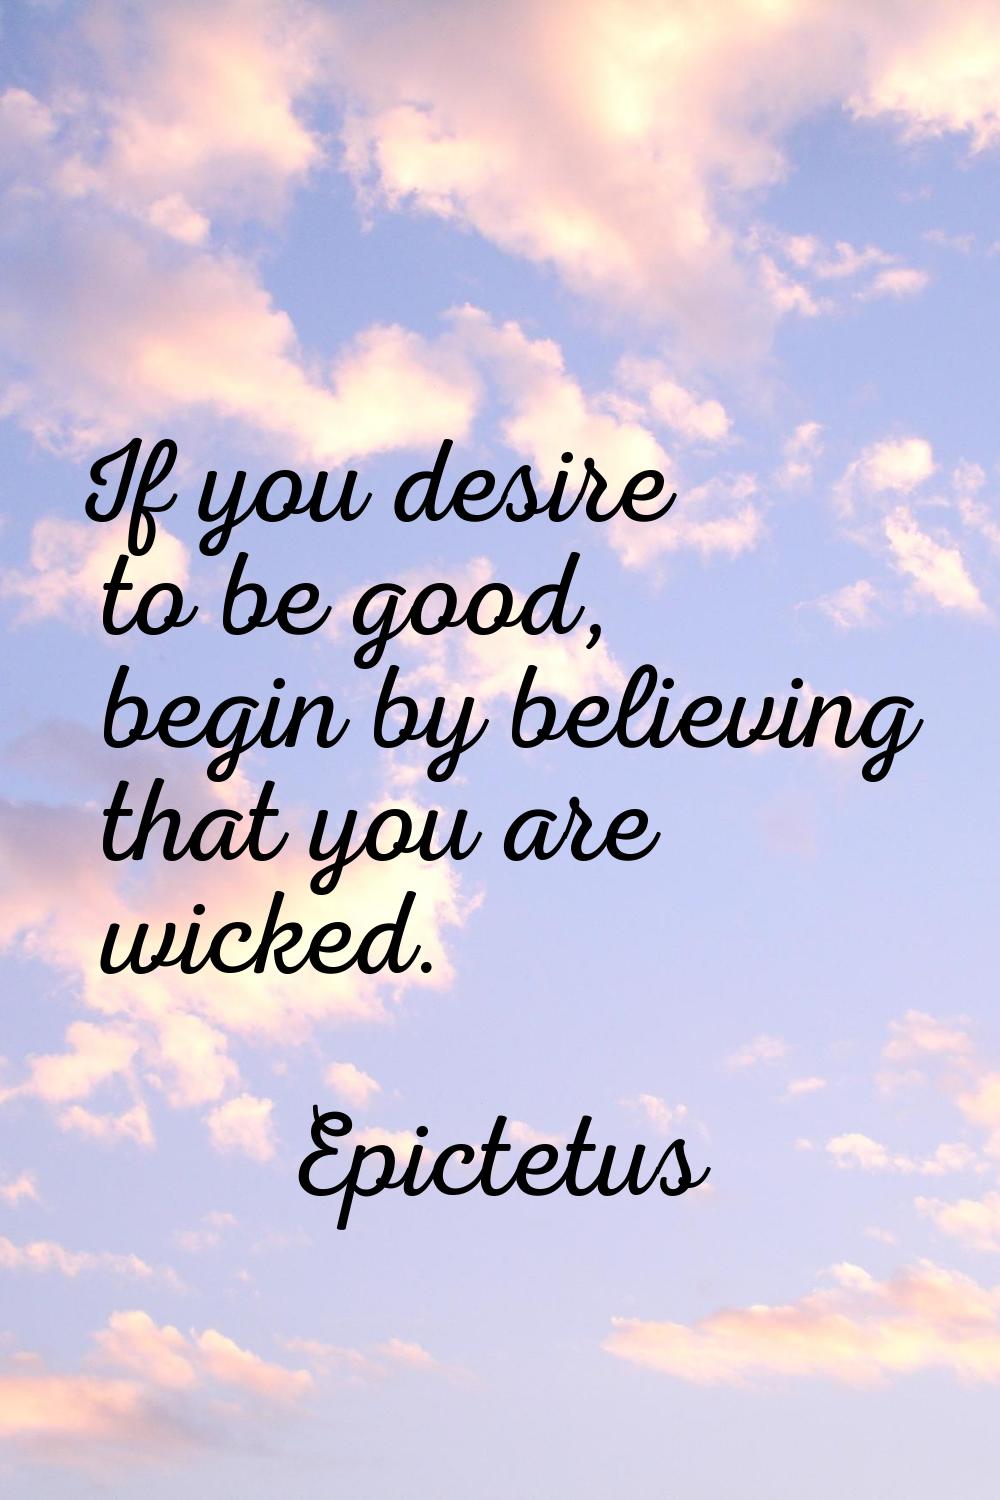 If you desire to be good, begin by believing that you are wicked.